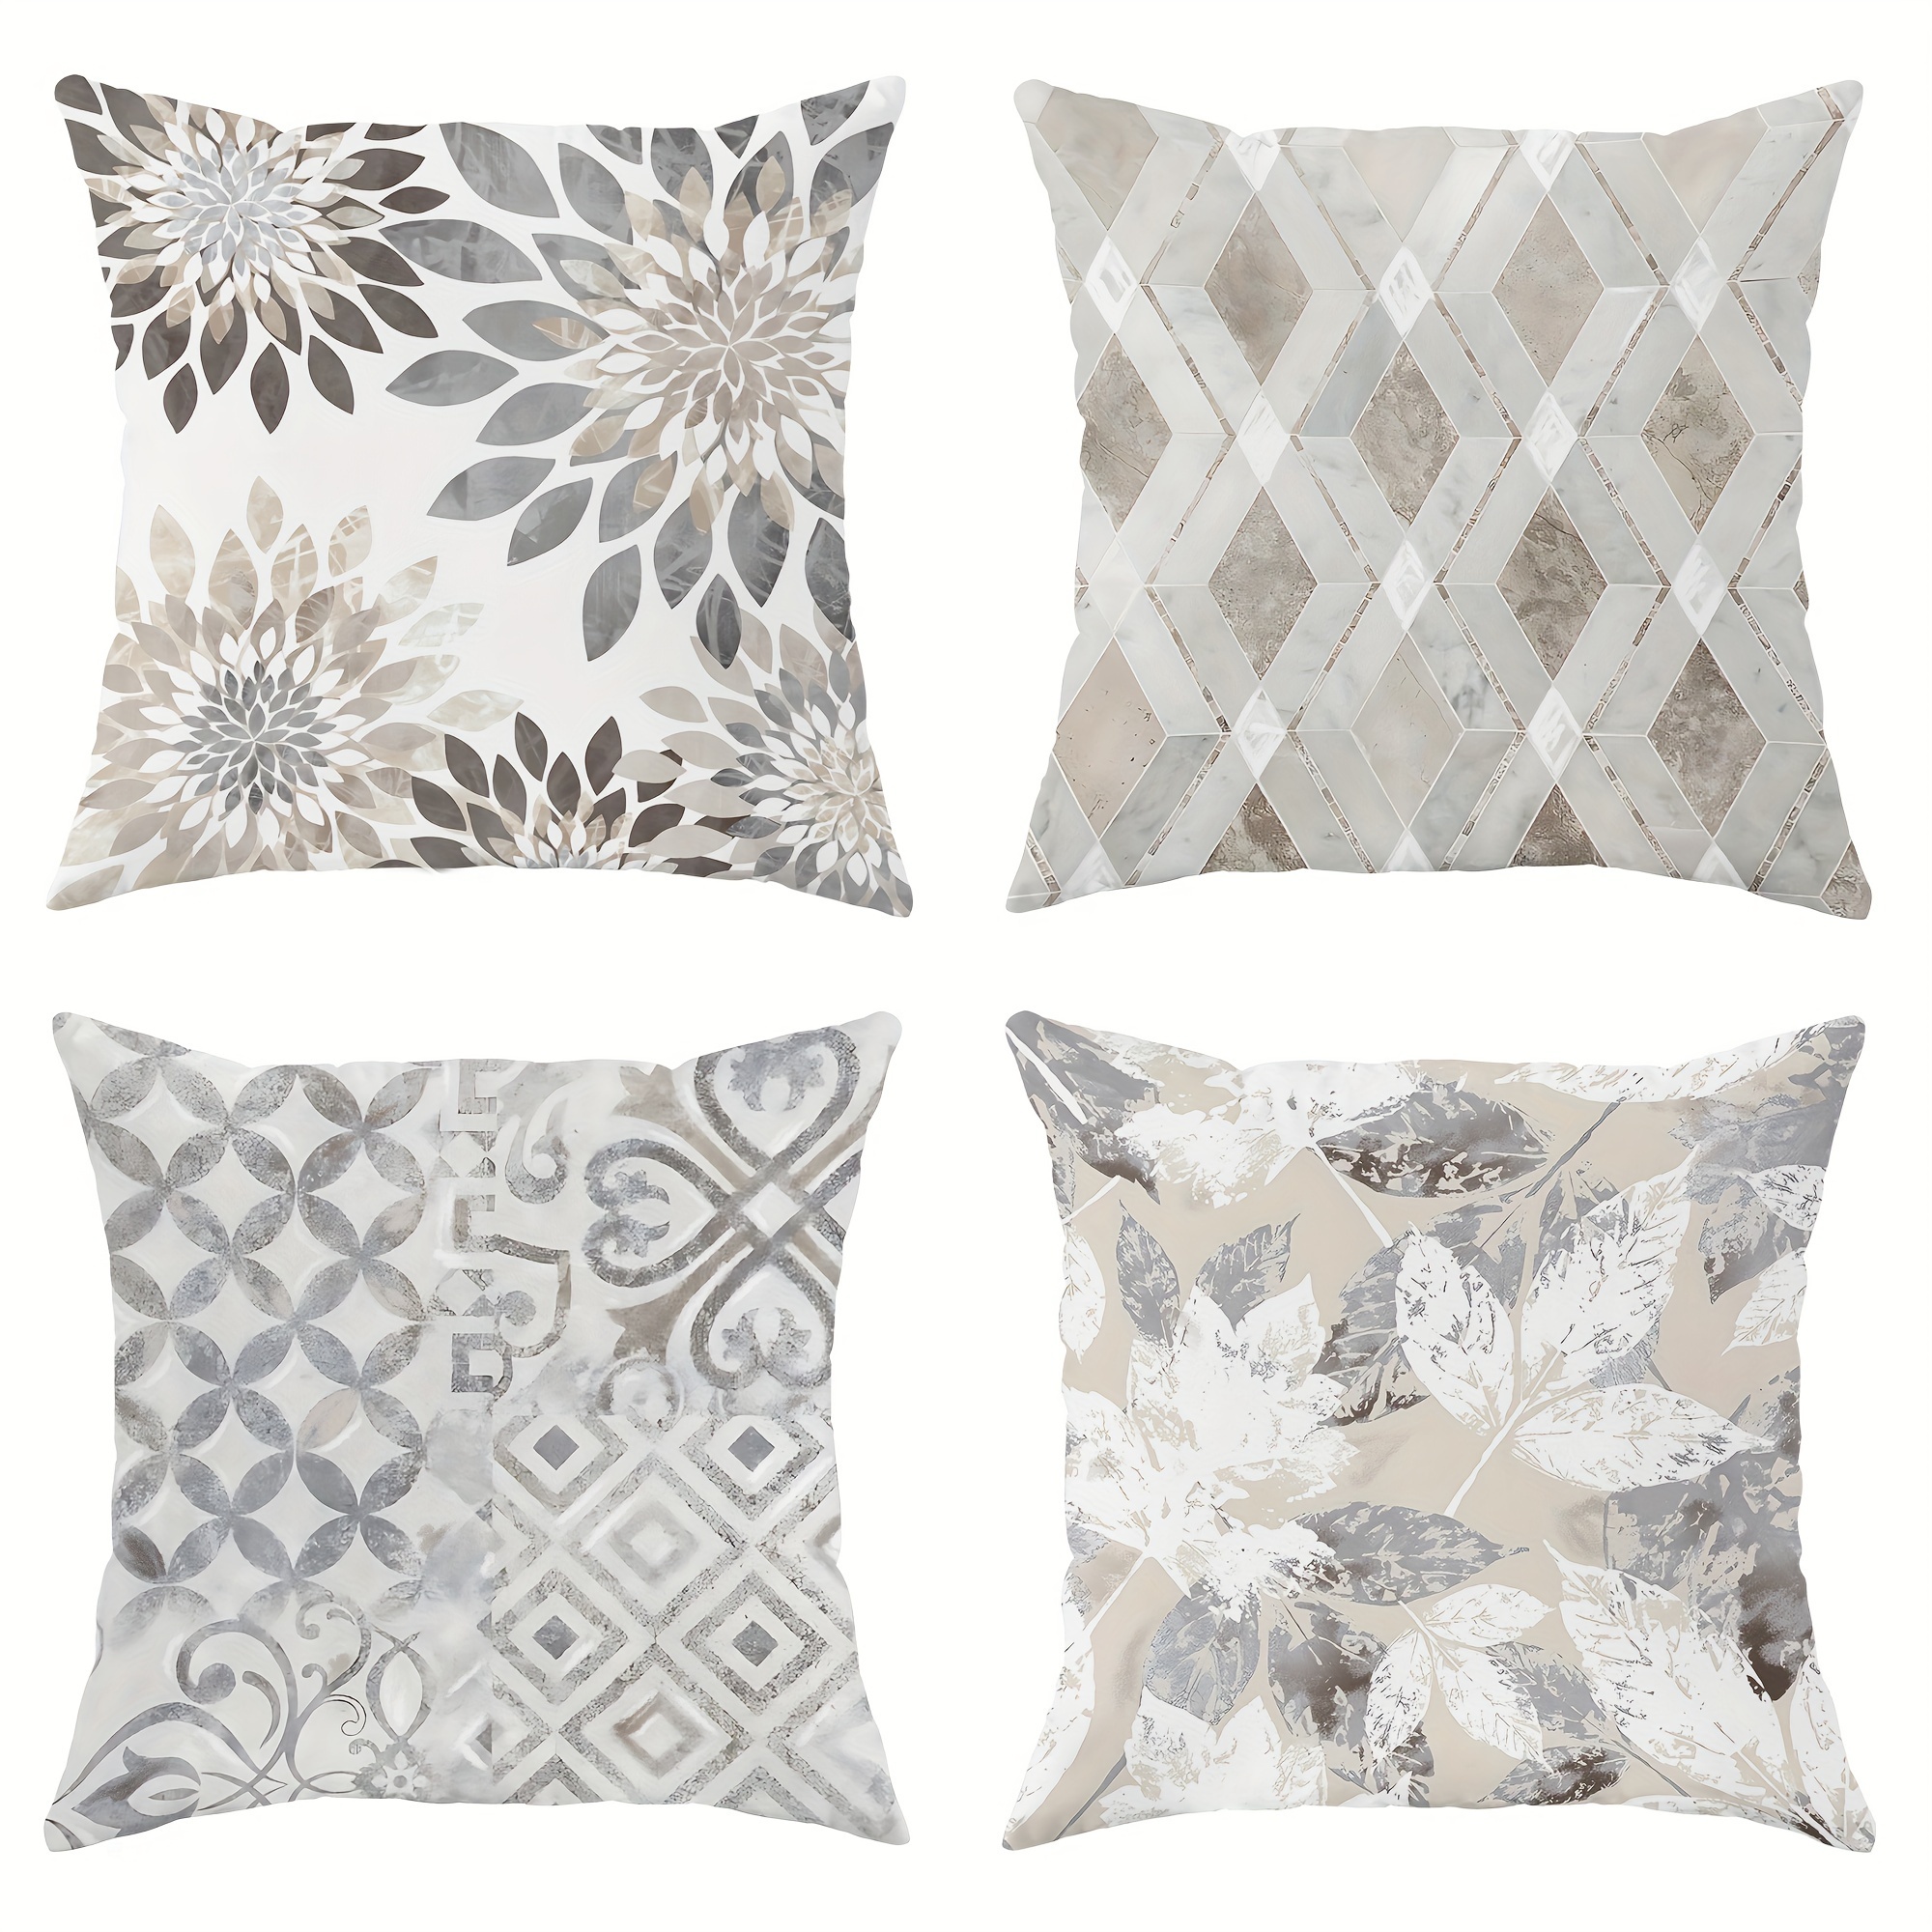 

4pcs, Floral Geometric Leaves Botanical Light Gray Polyester Throw Pillow Covers, Modern Neutral Pillow Covers, Decorative Cushion Covers 45×45cm/18 "x18" For Living Room Bedroom Sofa Bed Decoration